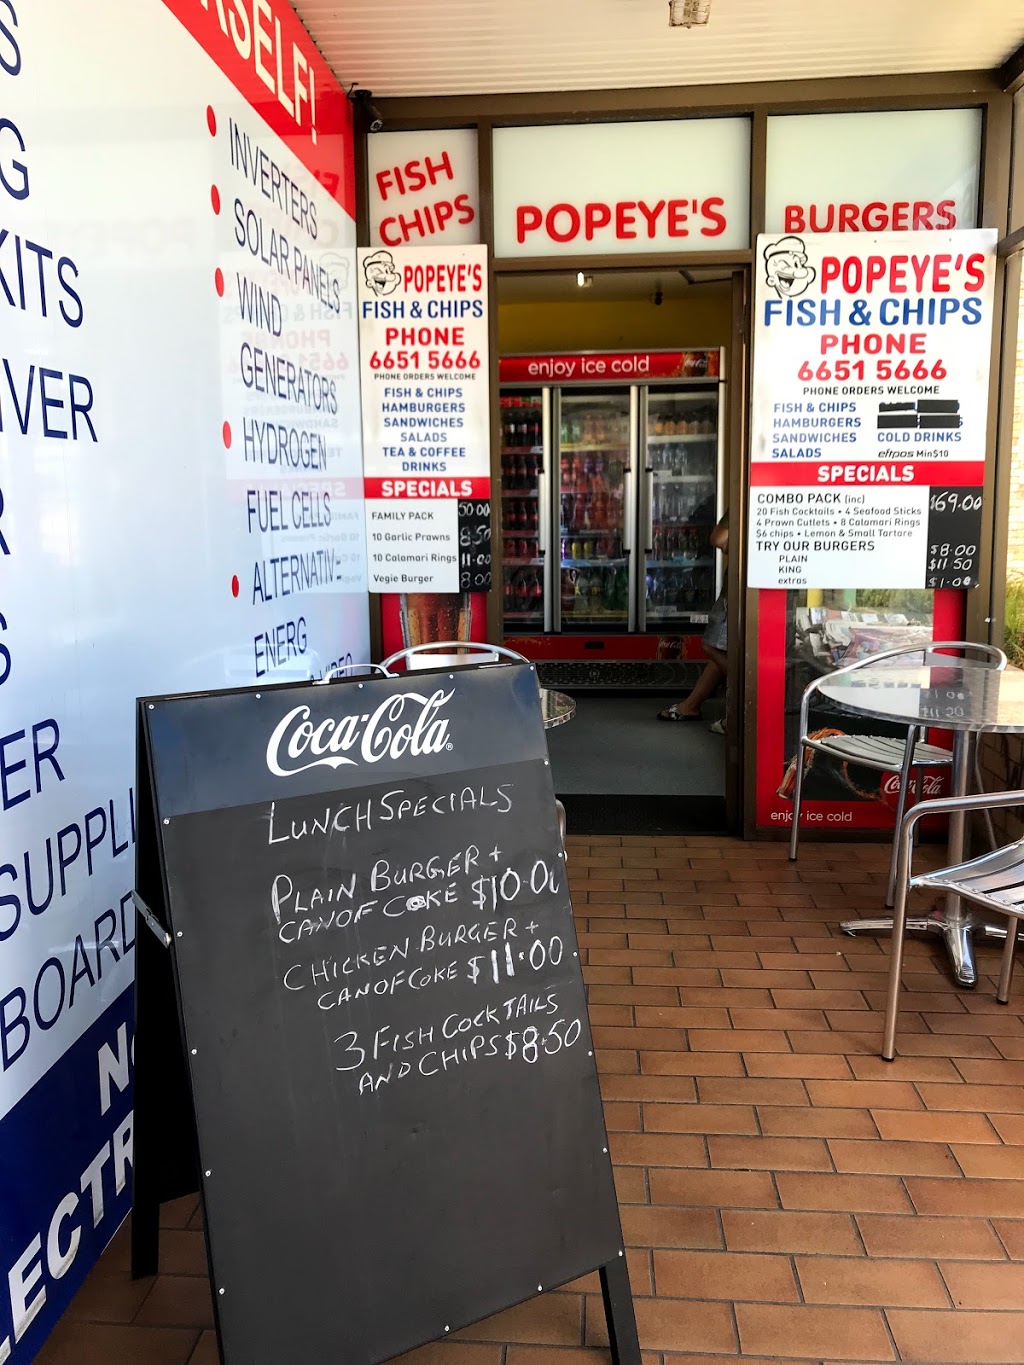 Popeyes Fish & Chips | restaurant | 150 Pacific Hwy, Coffs Harbour NSW 2450, Australia | 0266515666 OR +61 2 6651 5666